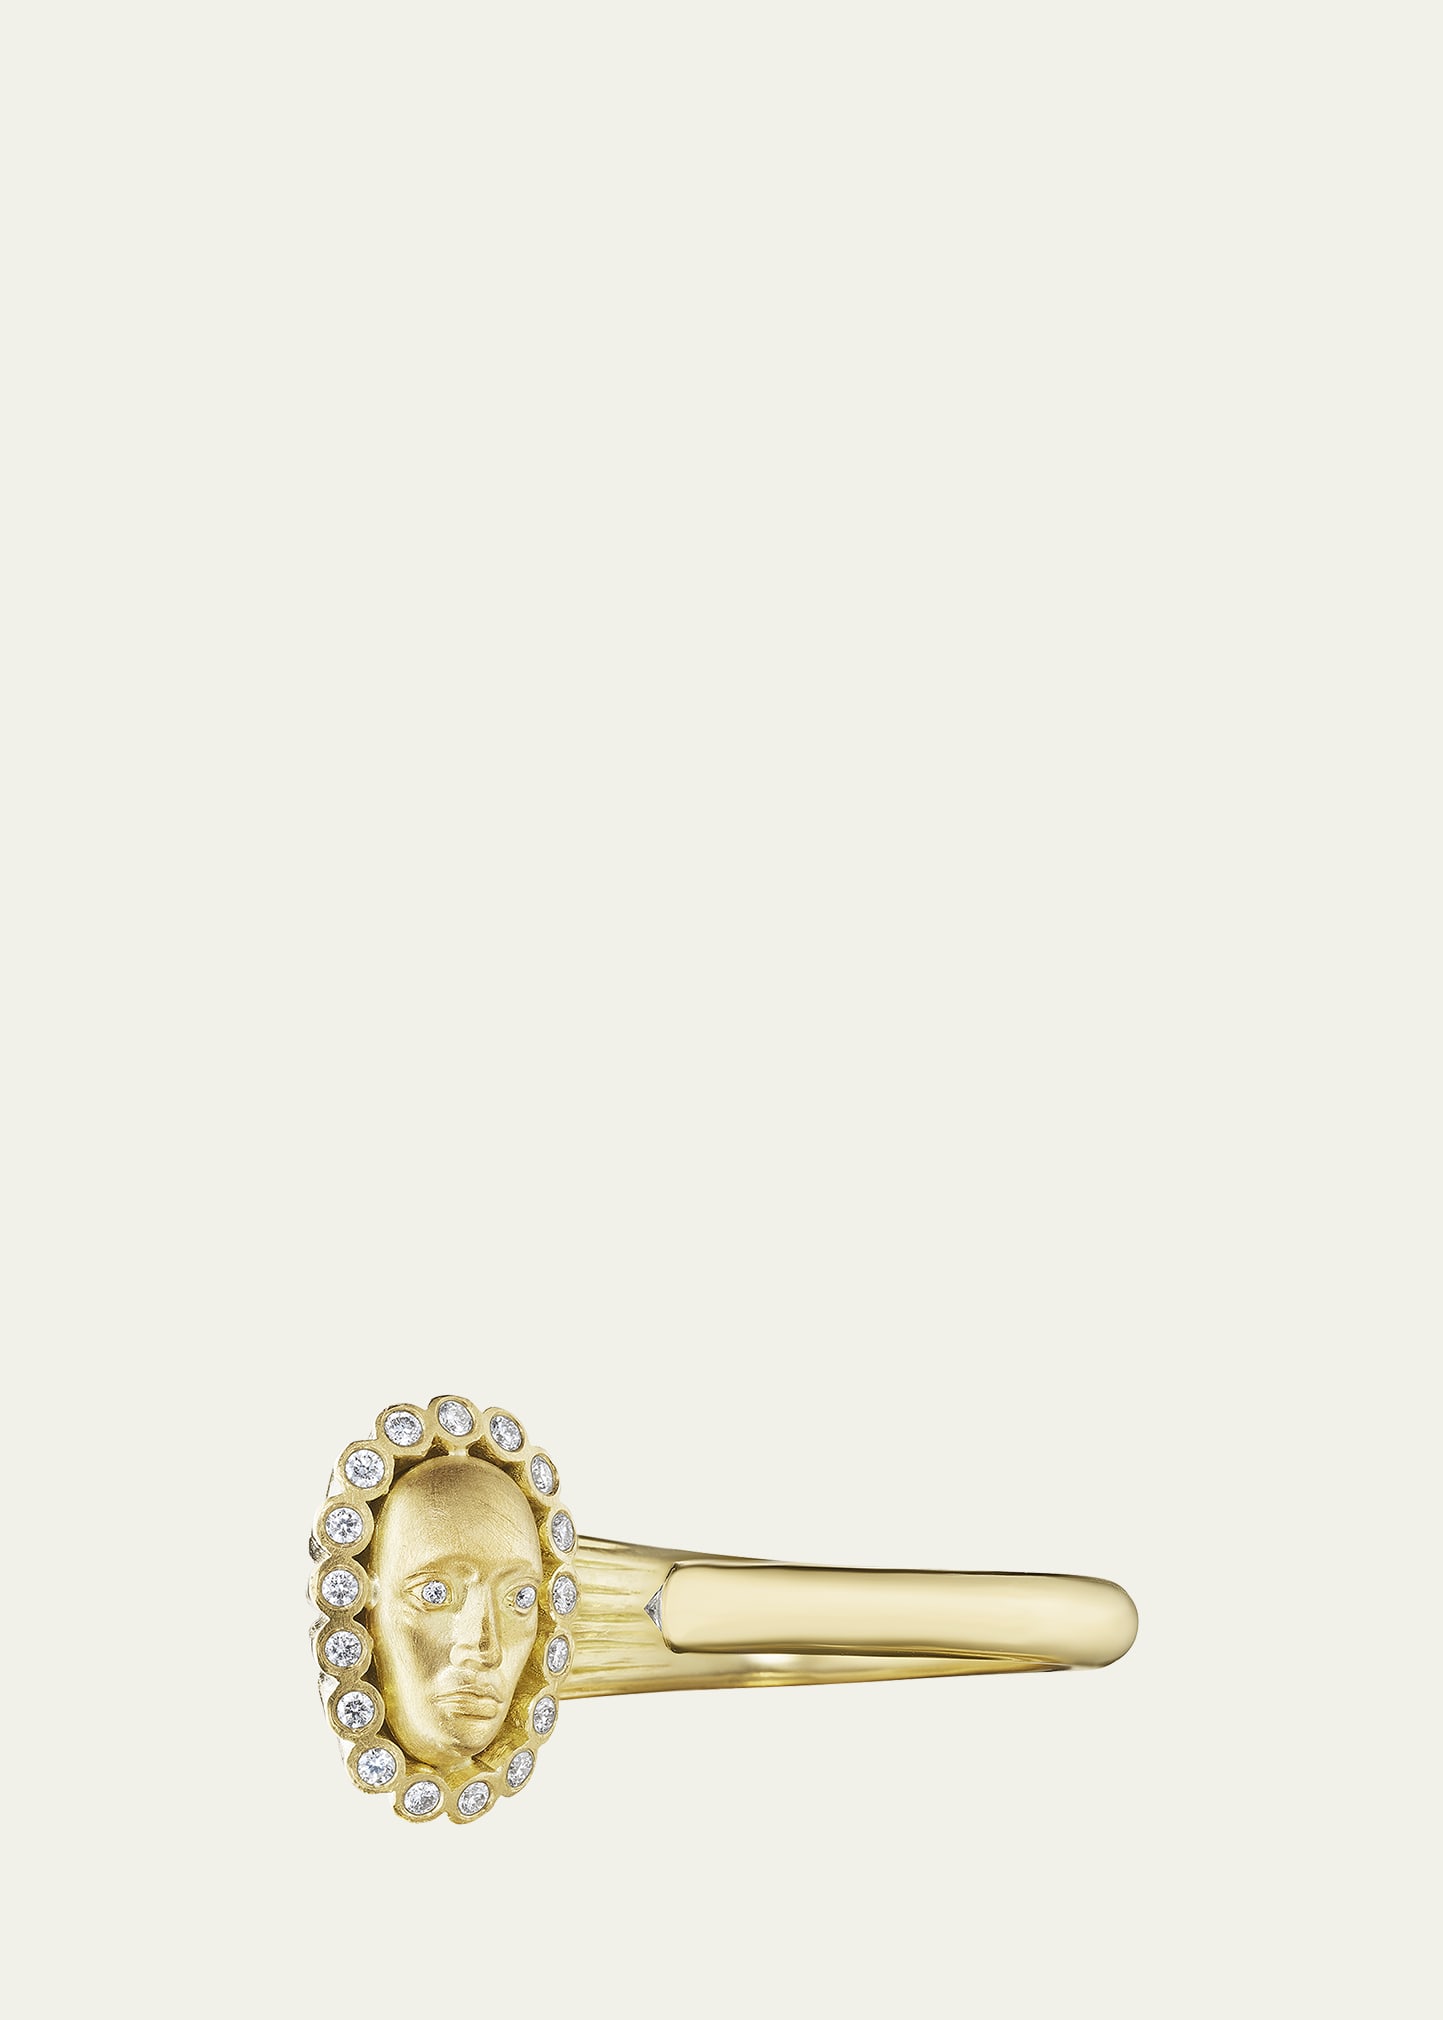 Anthony Lent Vulcana Comet Flower Ring In 18k Gold With Diamonds In Yg